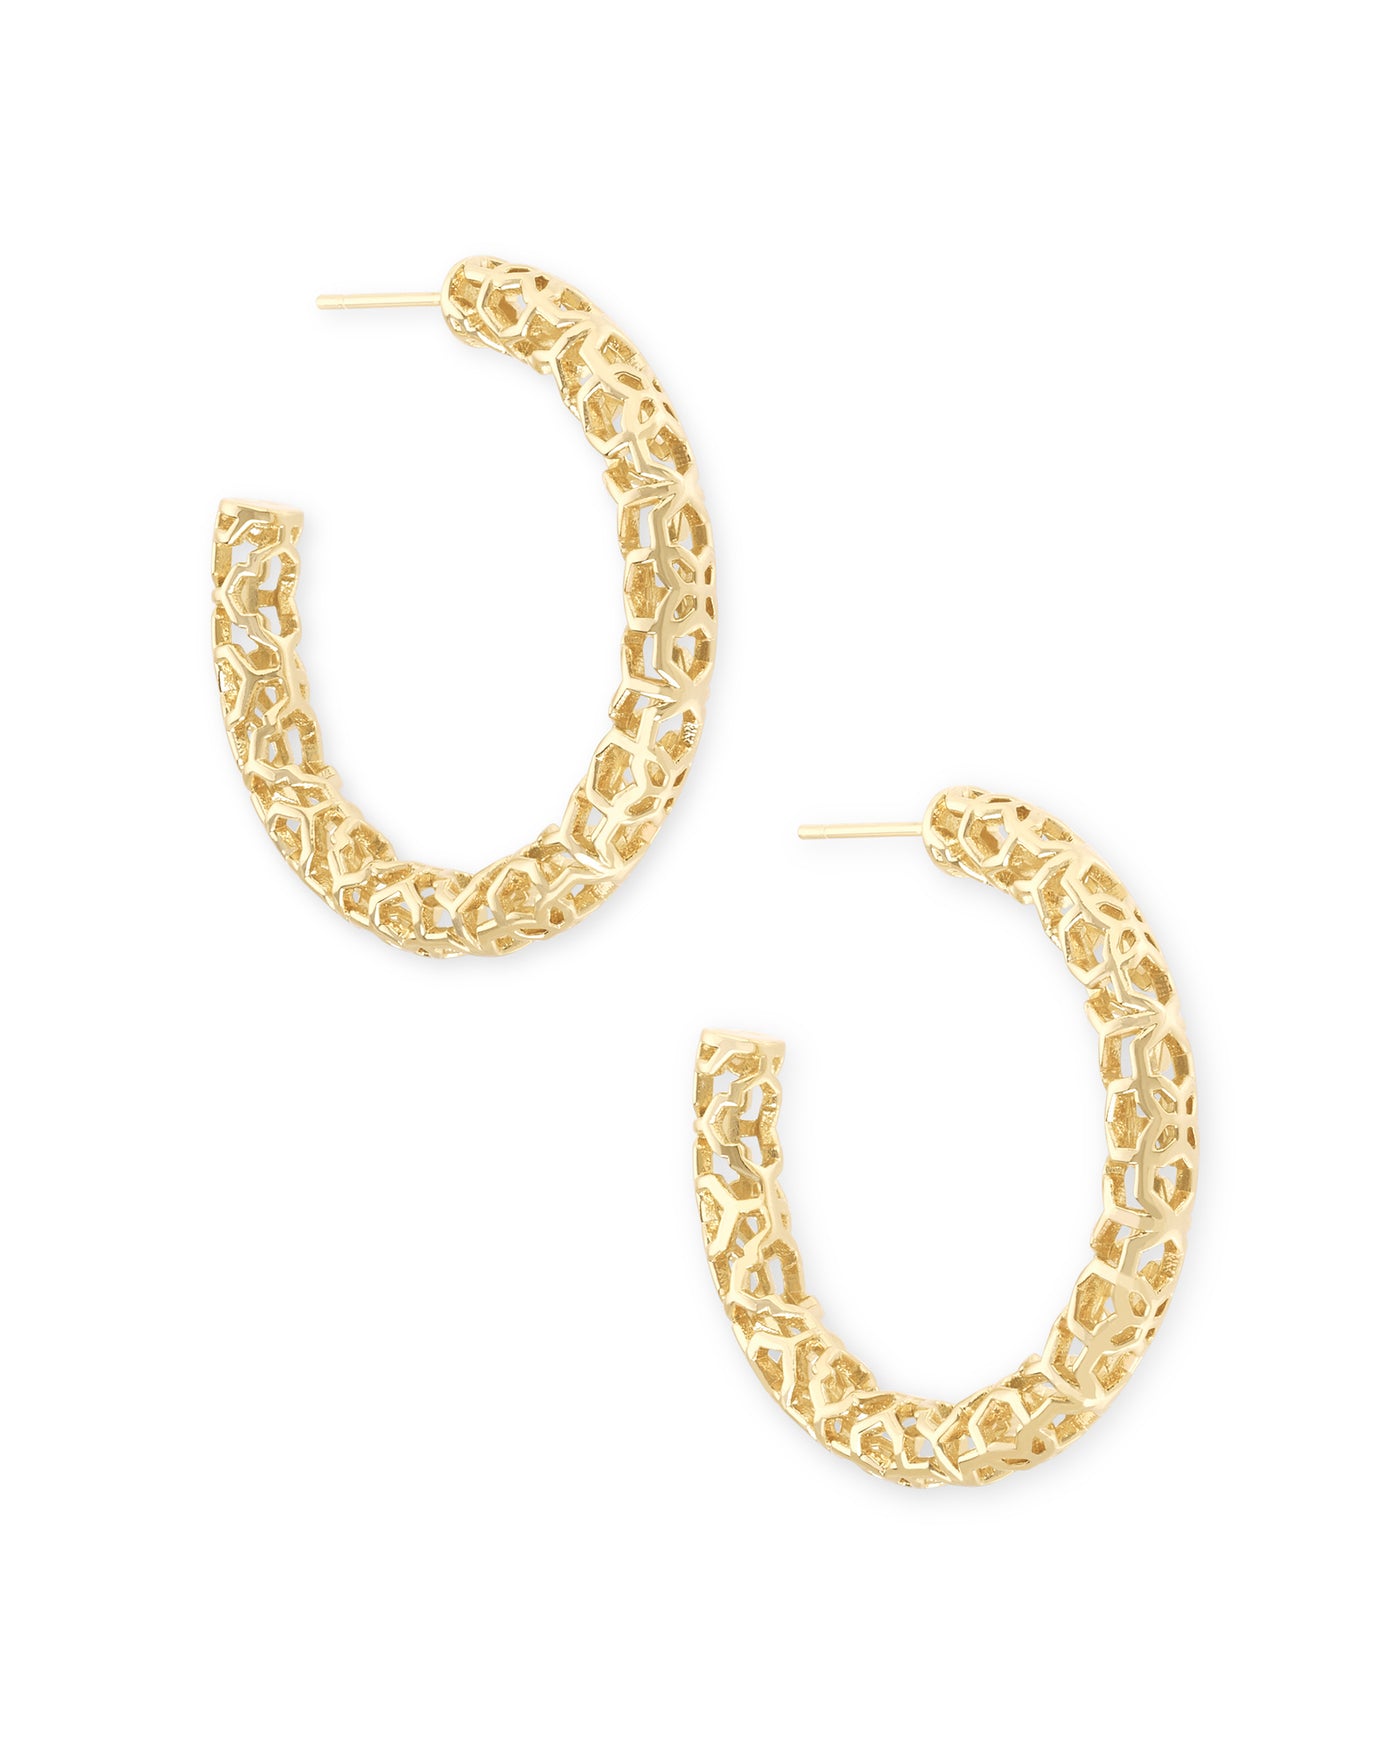 Maggie Small Hoop Earrings in Gold Filigree on white background, front view.